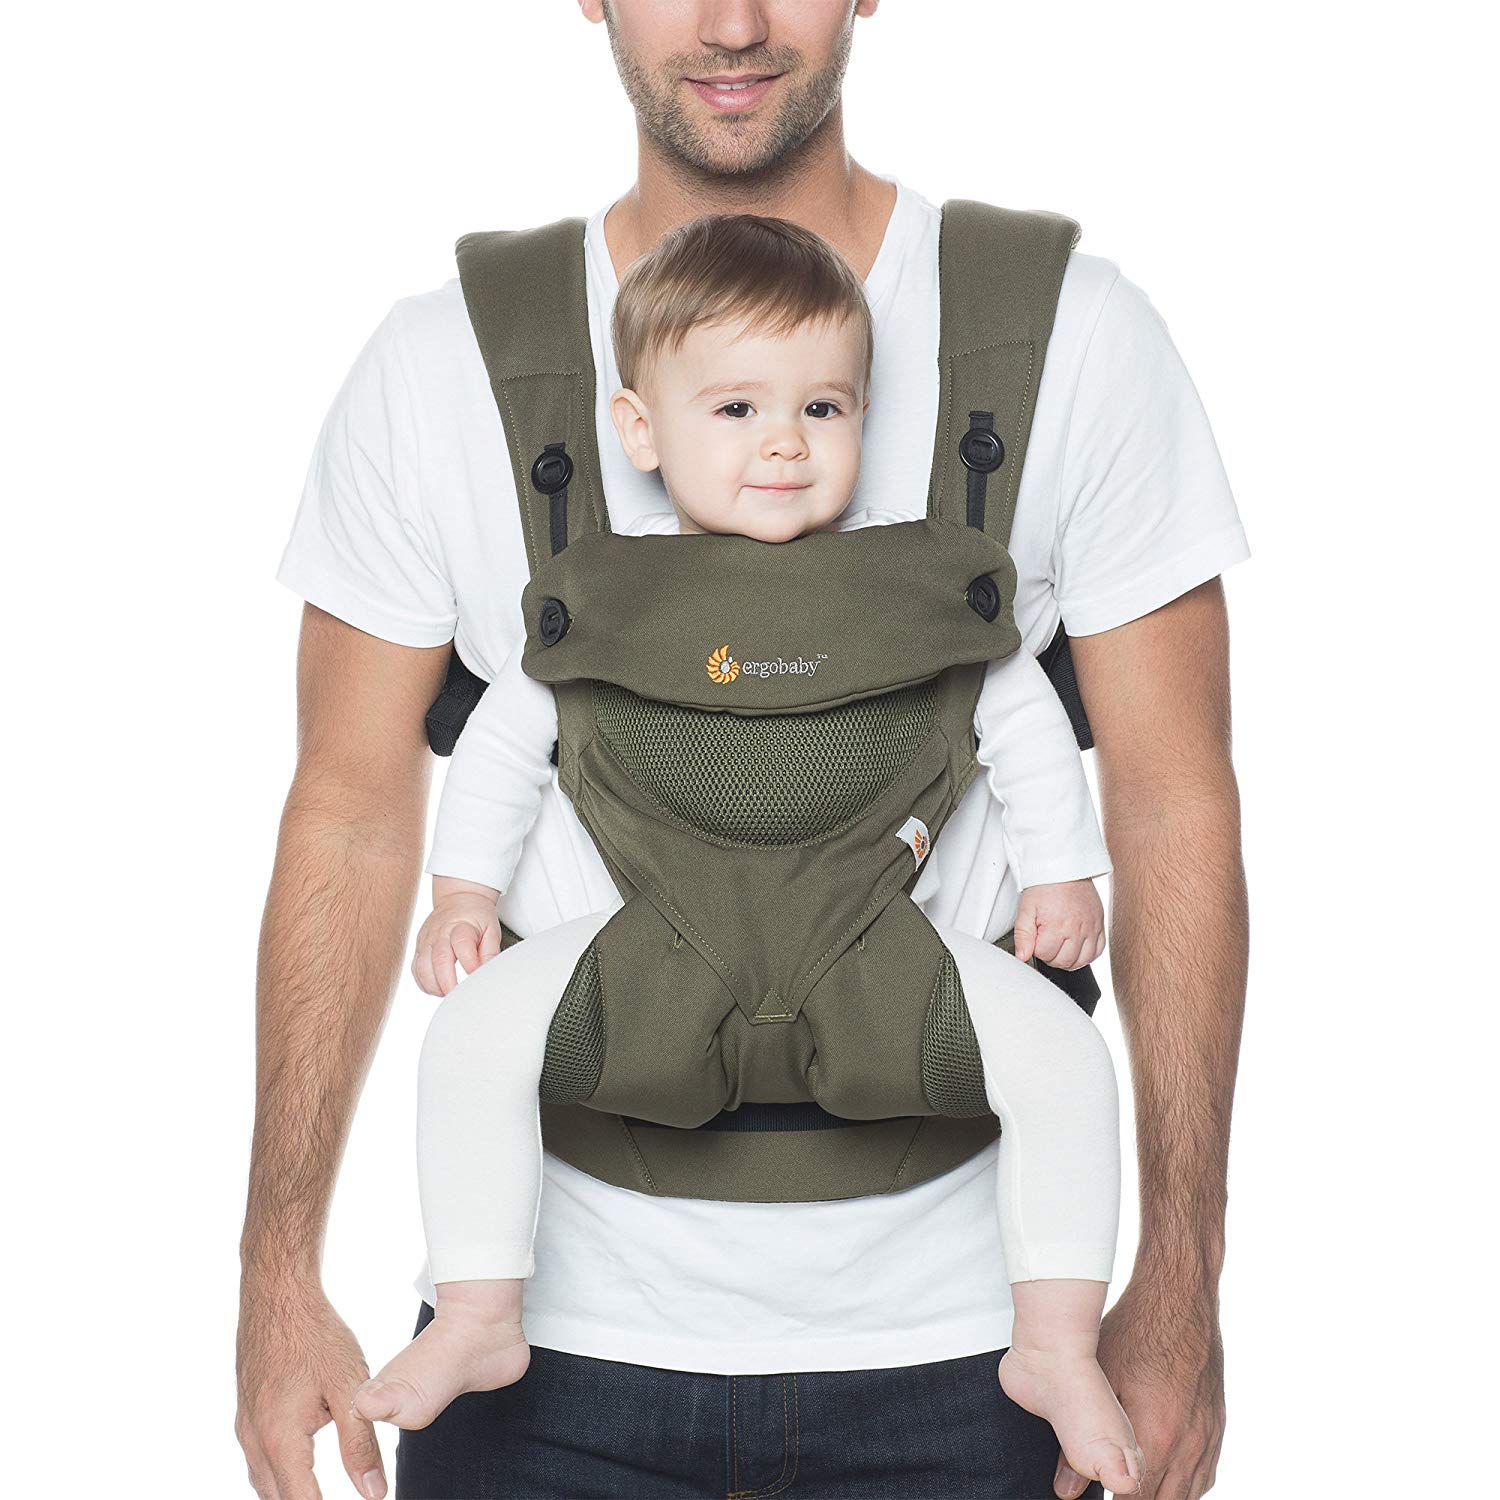 Ergobaby Baby Carrier 360 Cool Air Mesh Carbon Gray, Ergonomic 4in1 Carrying Bag Baby Carrying System Child carrier up to 20 kg